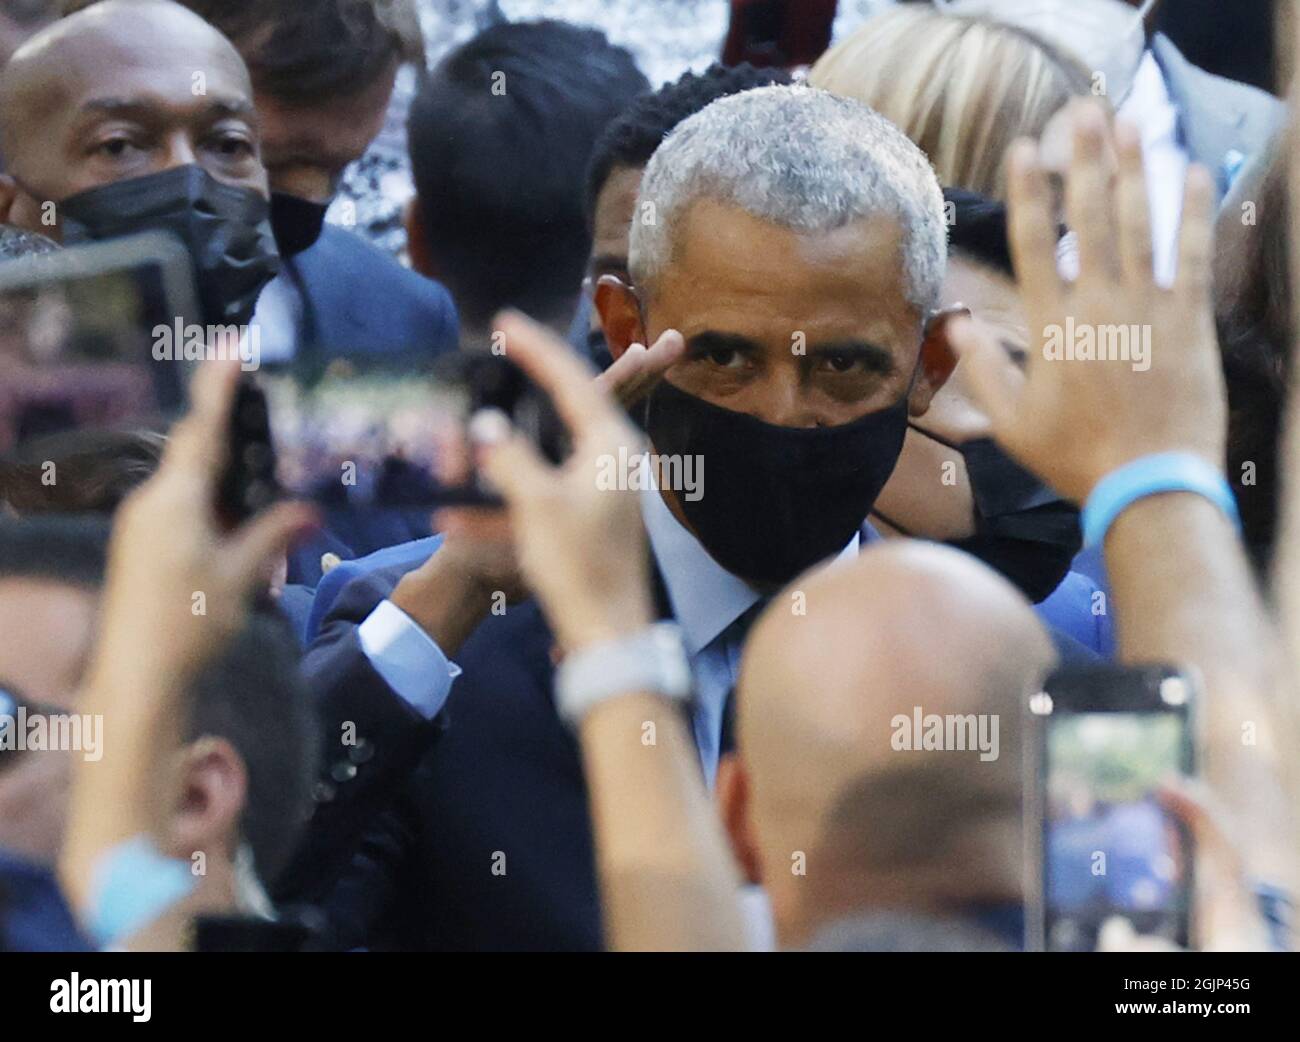 New York, United States. 11th Sep, 2021. Former President Barak Obama  attends ceremonies at ground zero in Lower Manhattan near One World Trade  Center on the 20th anniversary of the terrorist attacks